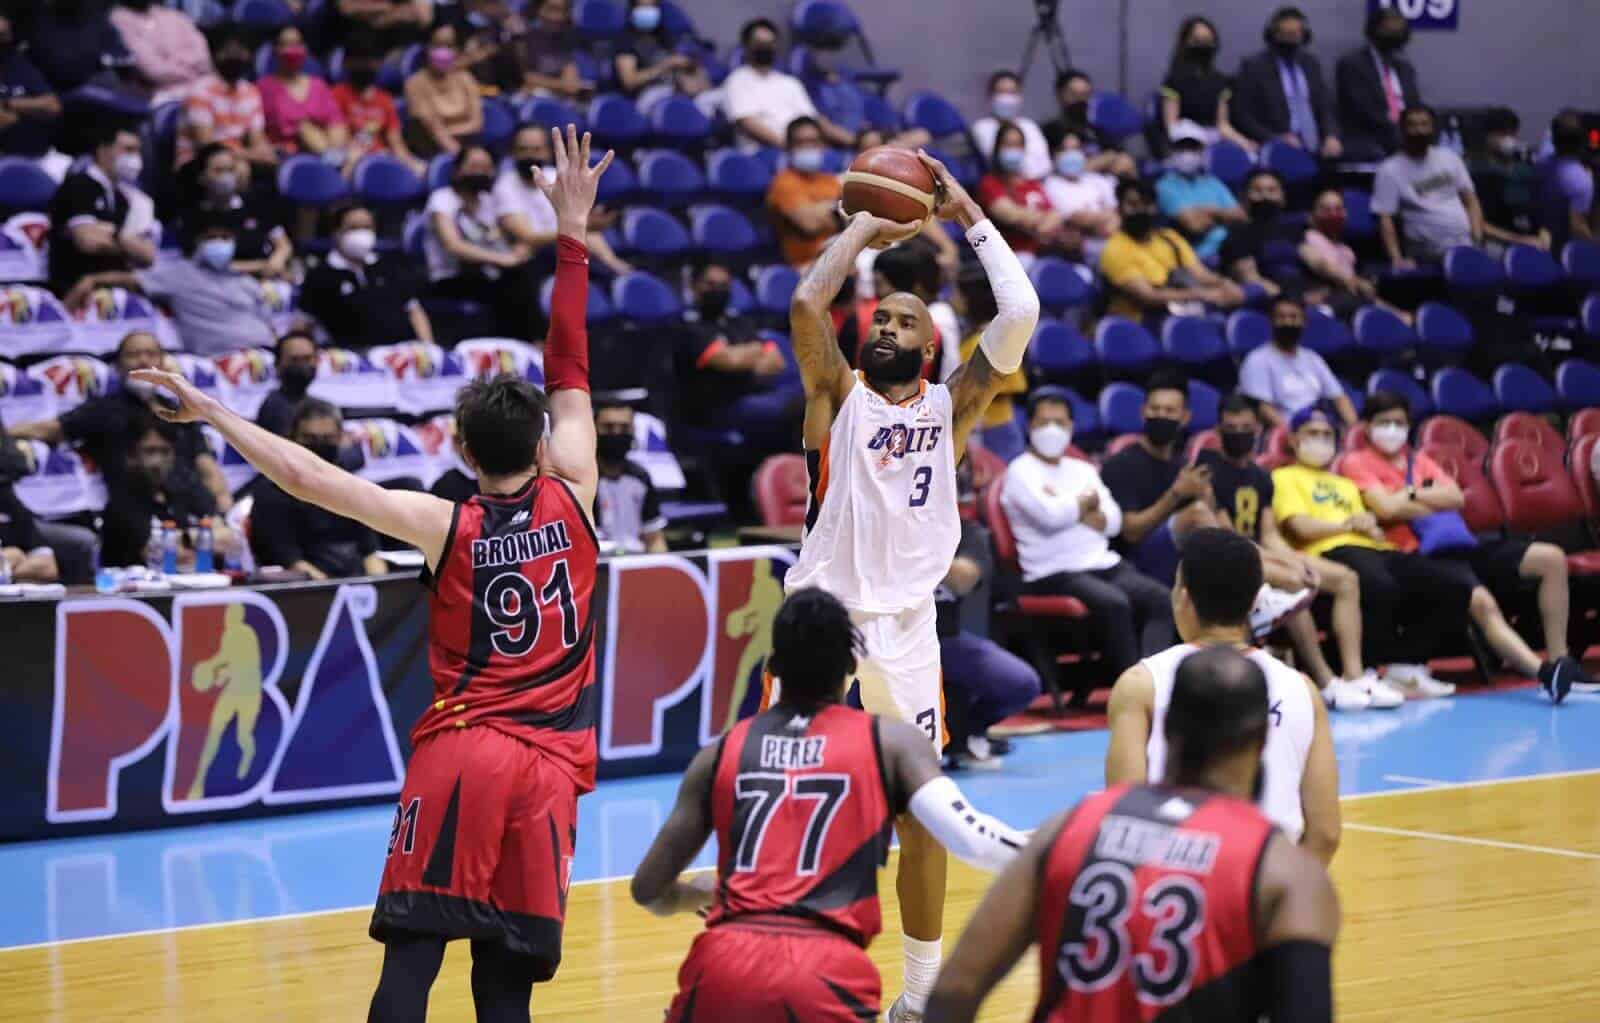 A basketball player blocks a shot during a game against San Miguel in the PBA Governors' Cup.